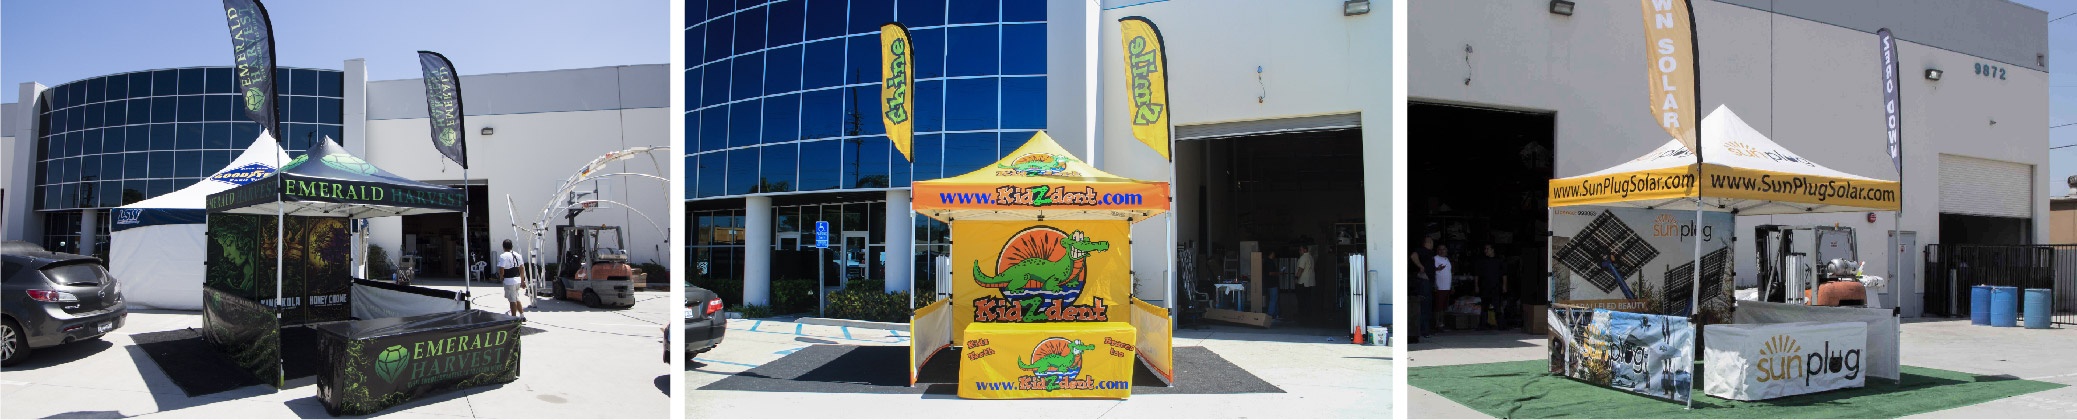 various adverting flag canopy packages with custom printing- all of them installed in front of the Promotional Design Group building in Los Angeles